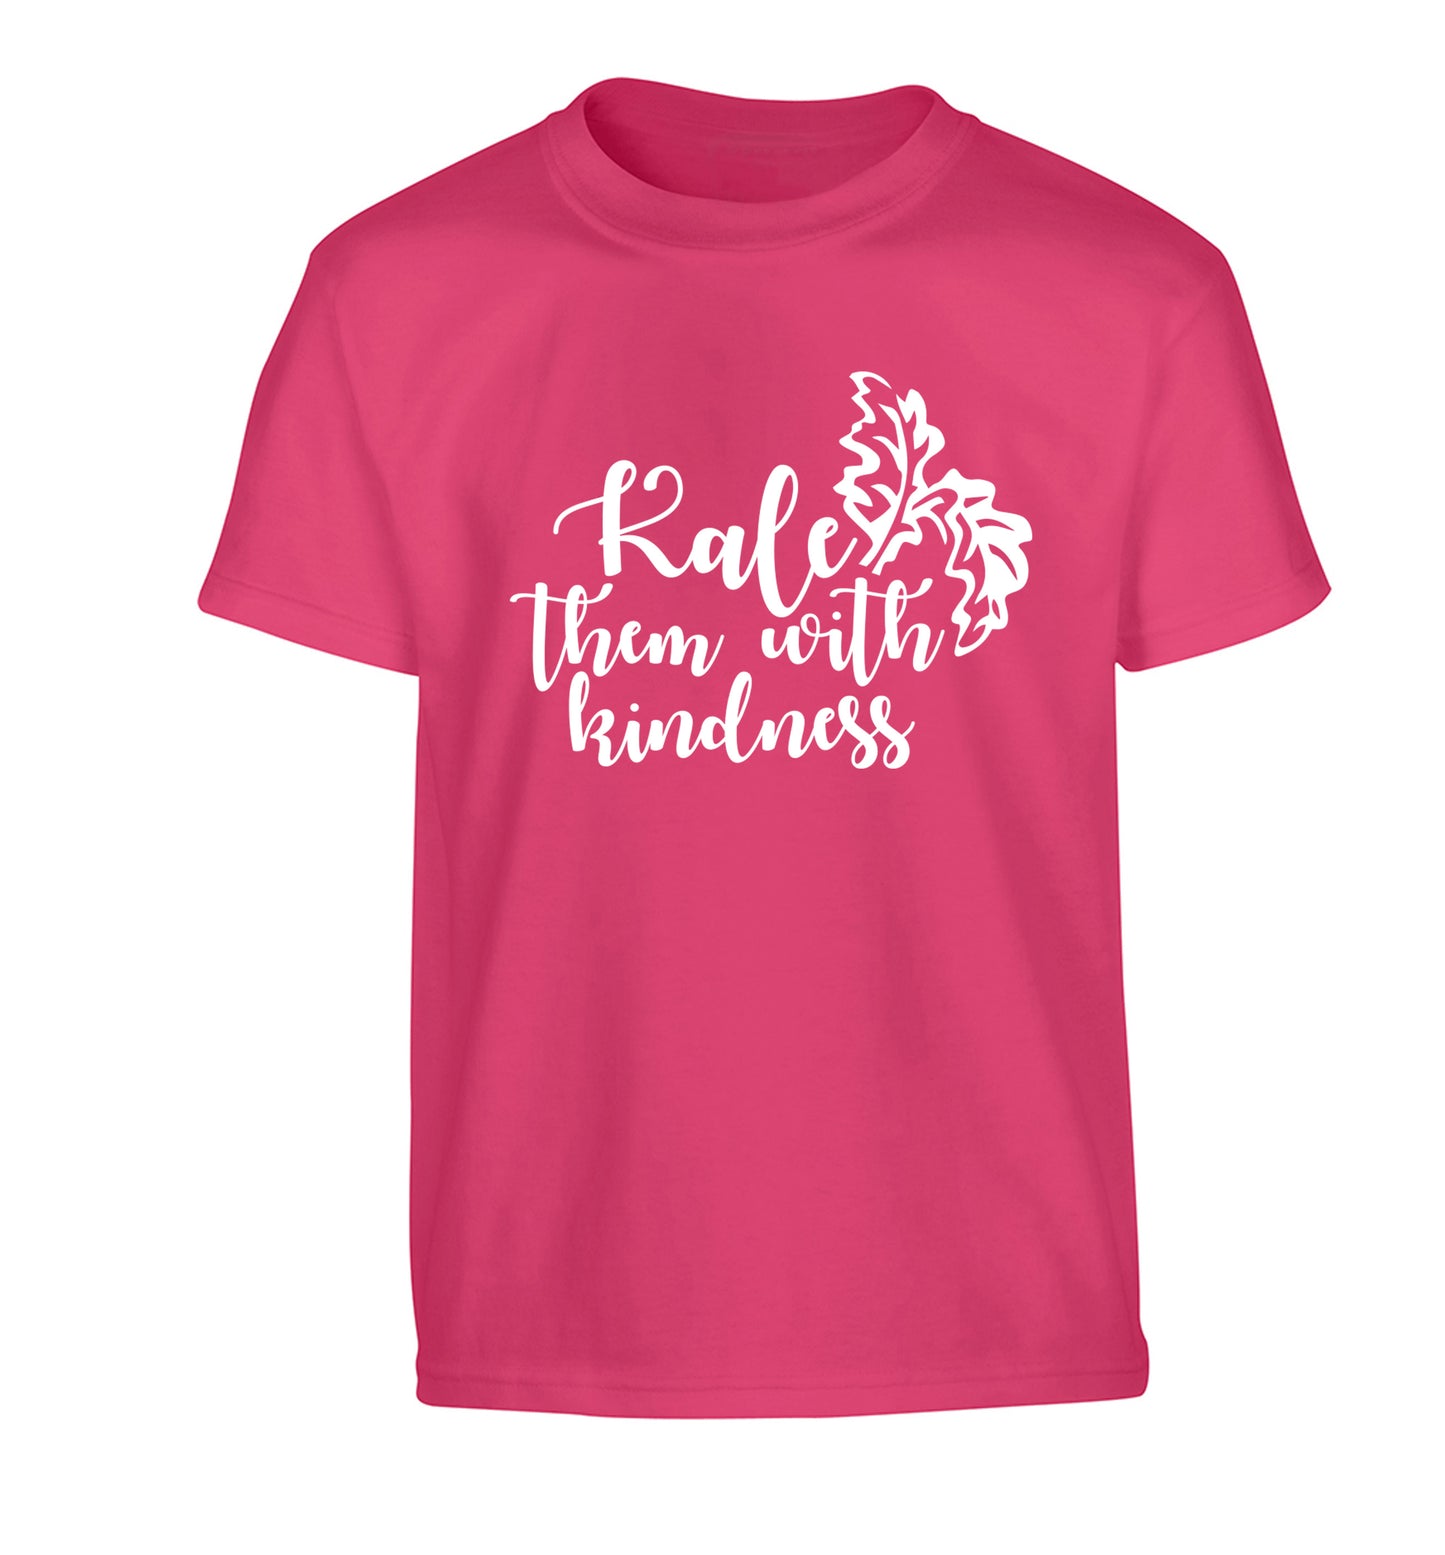 Kale them with kindness Children's pink Tshirt 12-14 Years